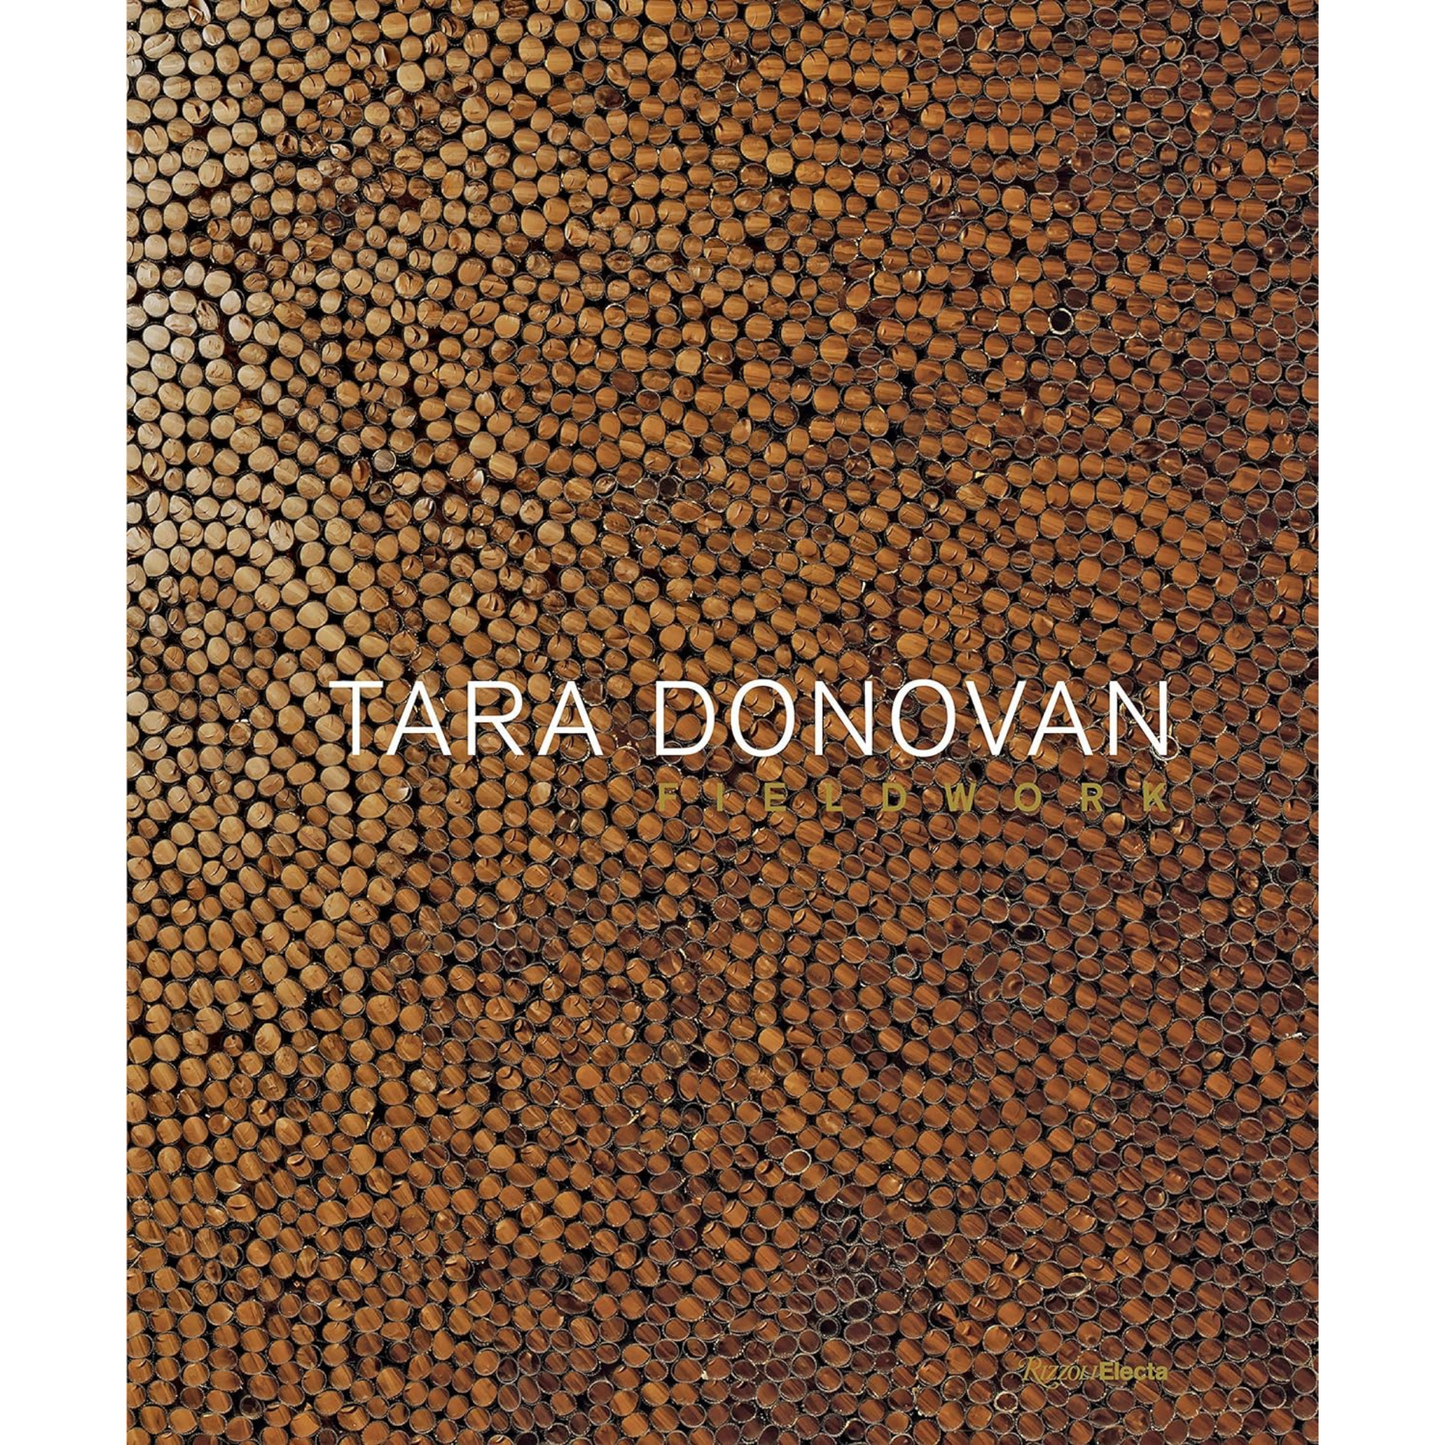 Cover of Tara Donovan monograph, with a close up of a sculpture.